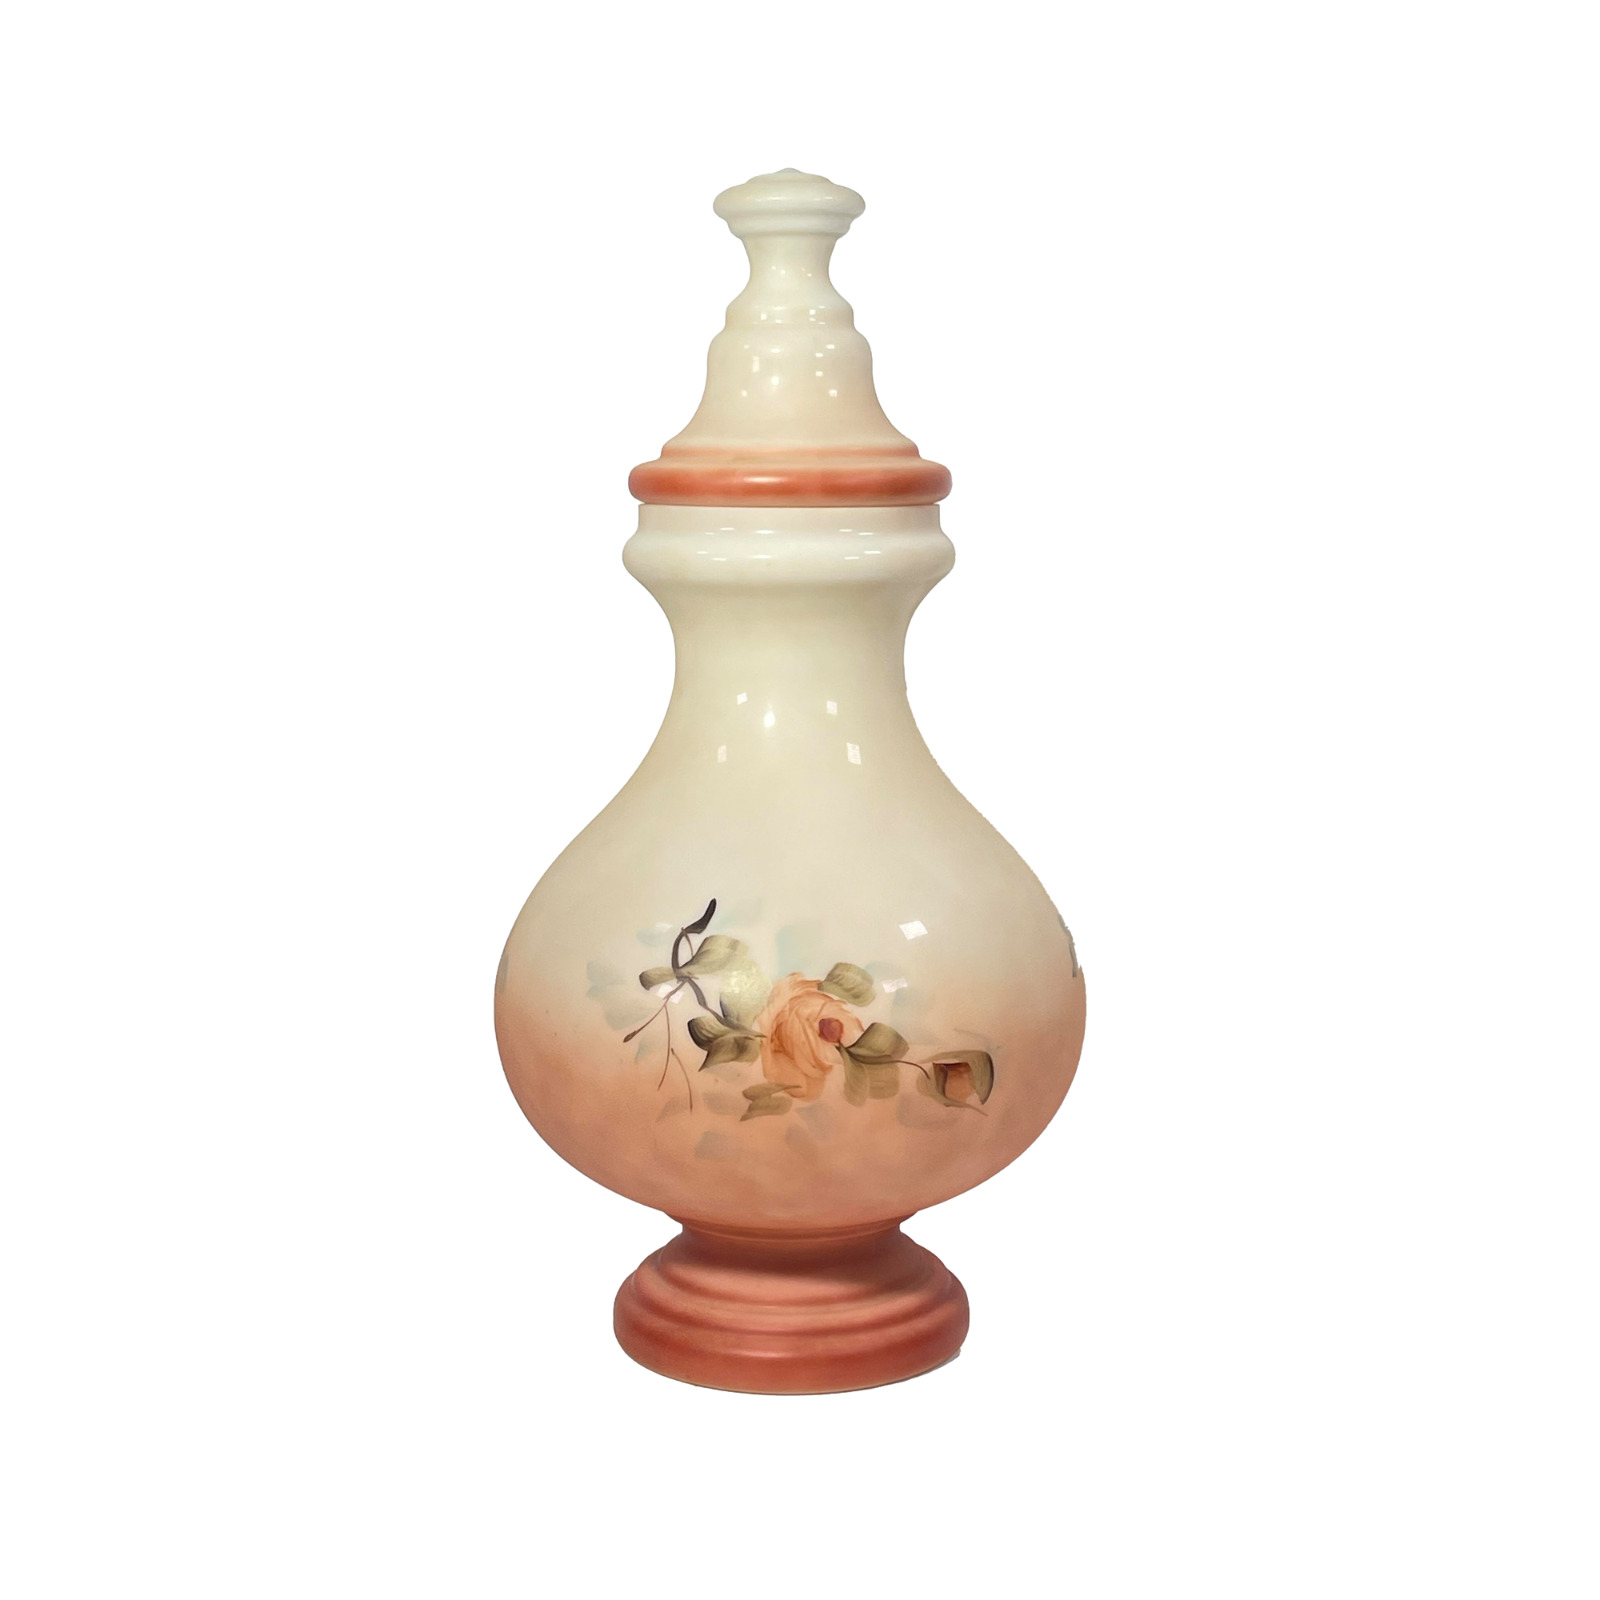 German Crafted Milk Glass Urn with a Porcelain-Like Hand-Painted Floral Finish